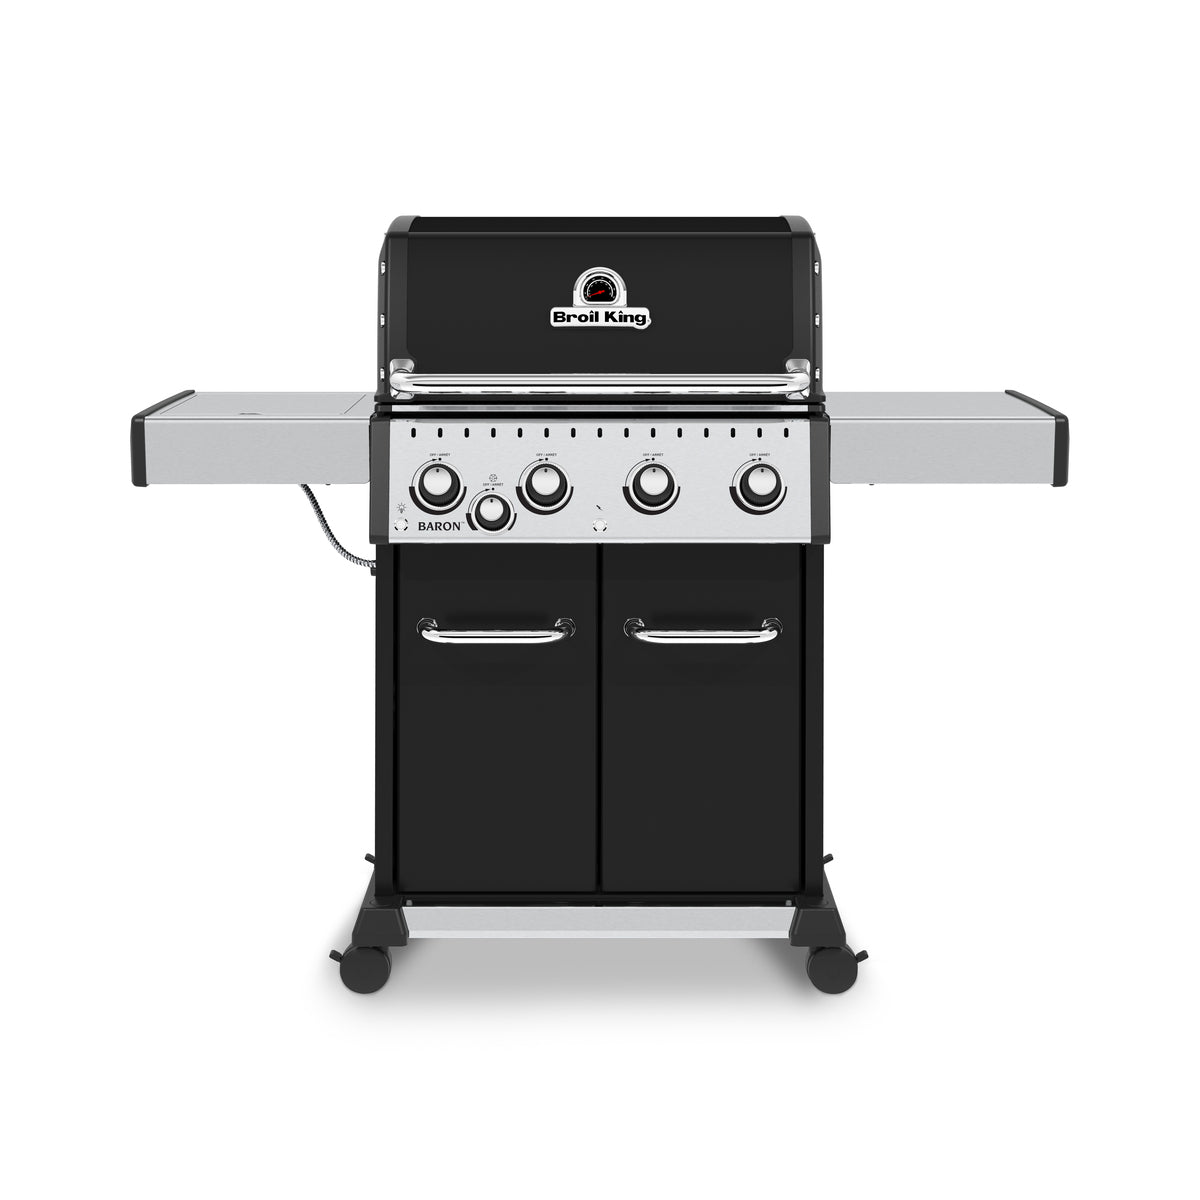 BroilKing Baron 440 Pro: Powerhouse grill with sleek design, showcased on a clean white background